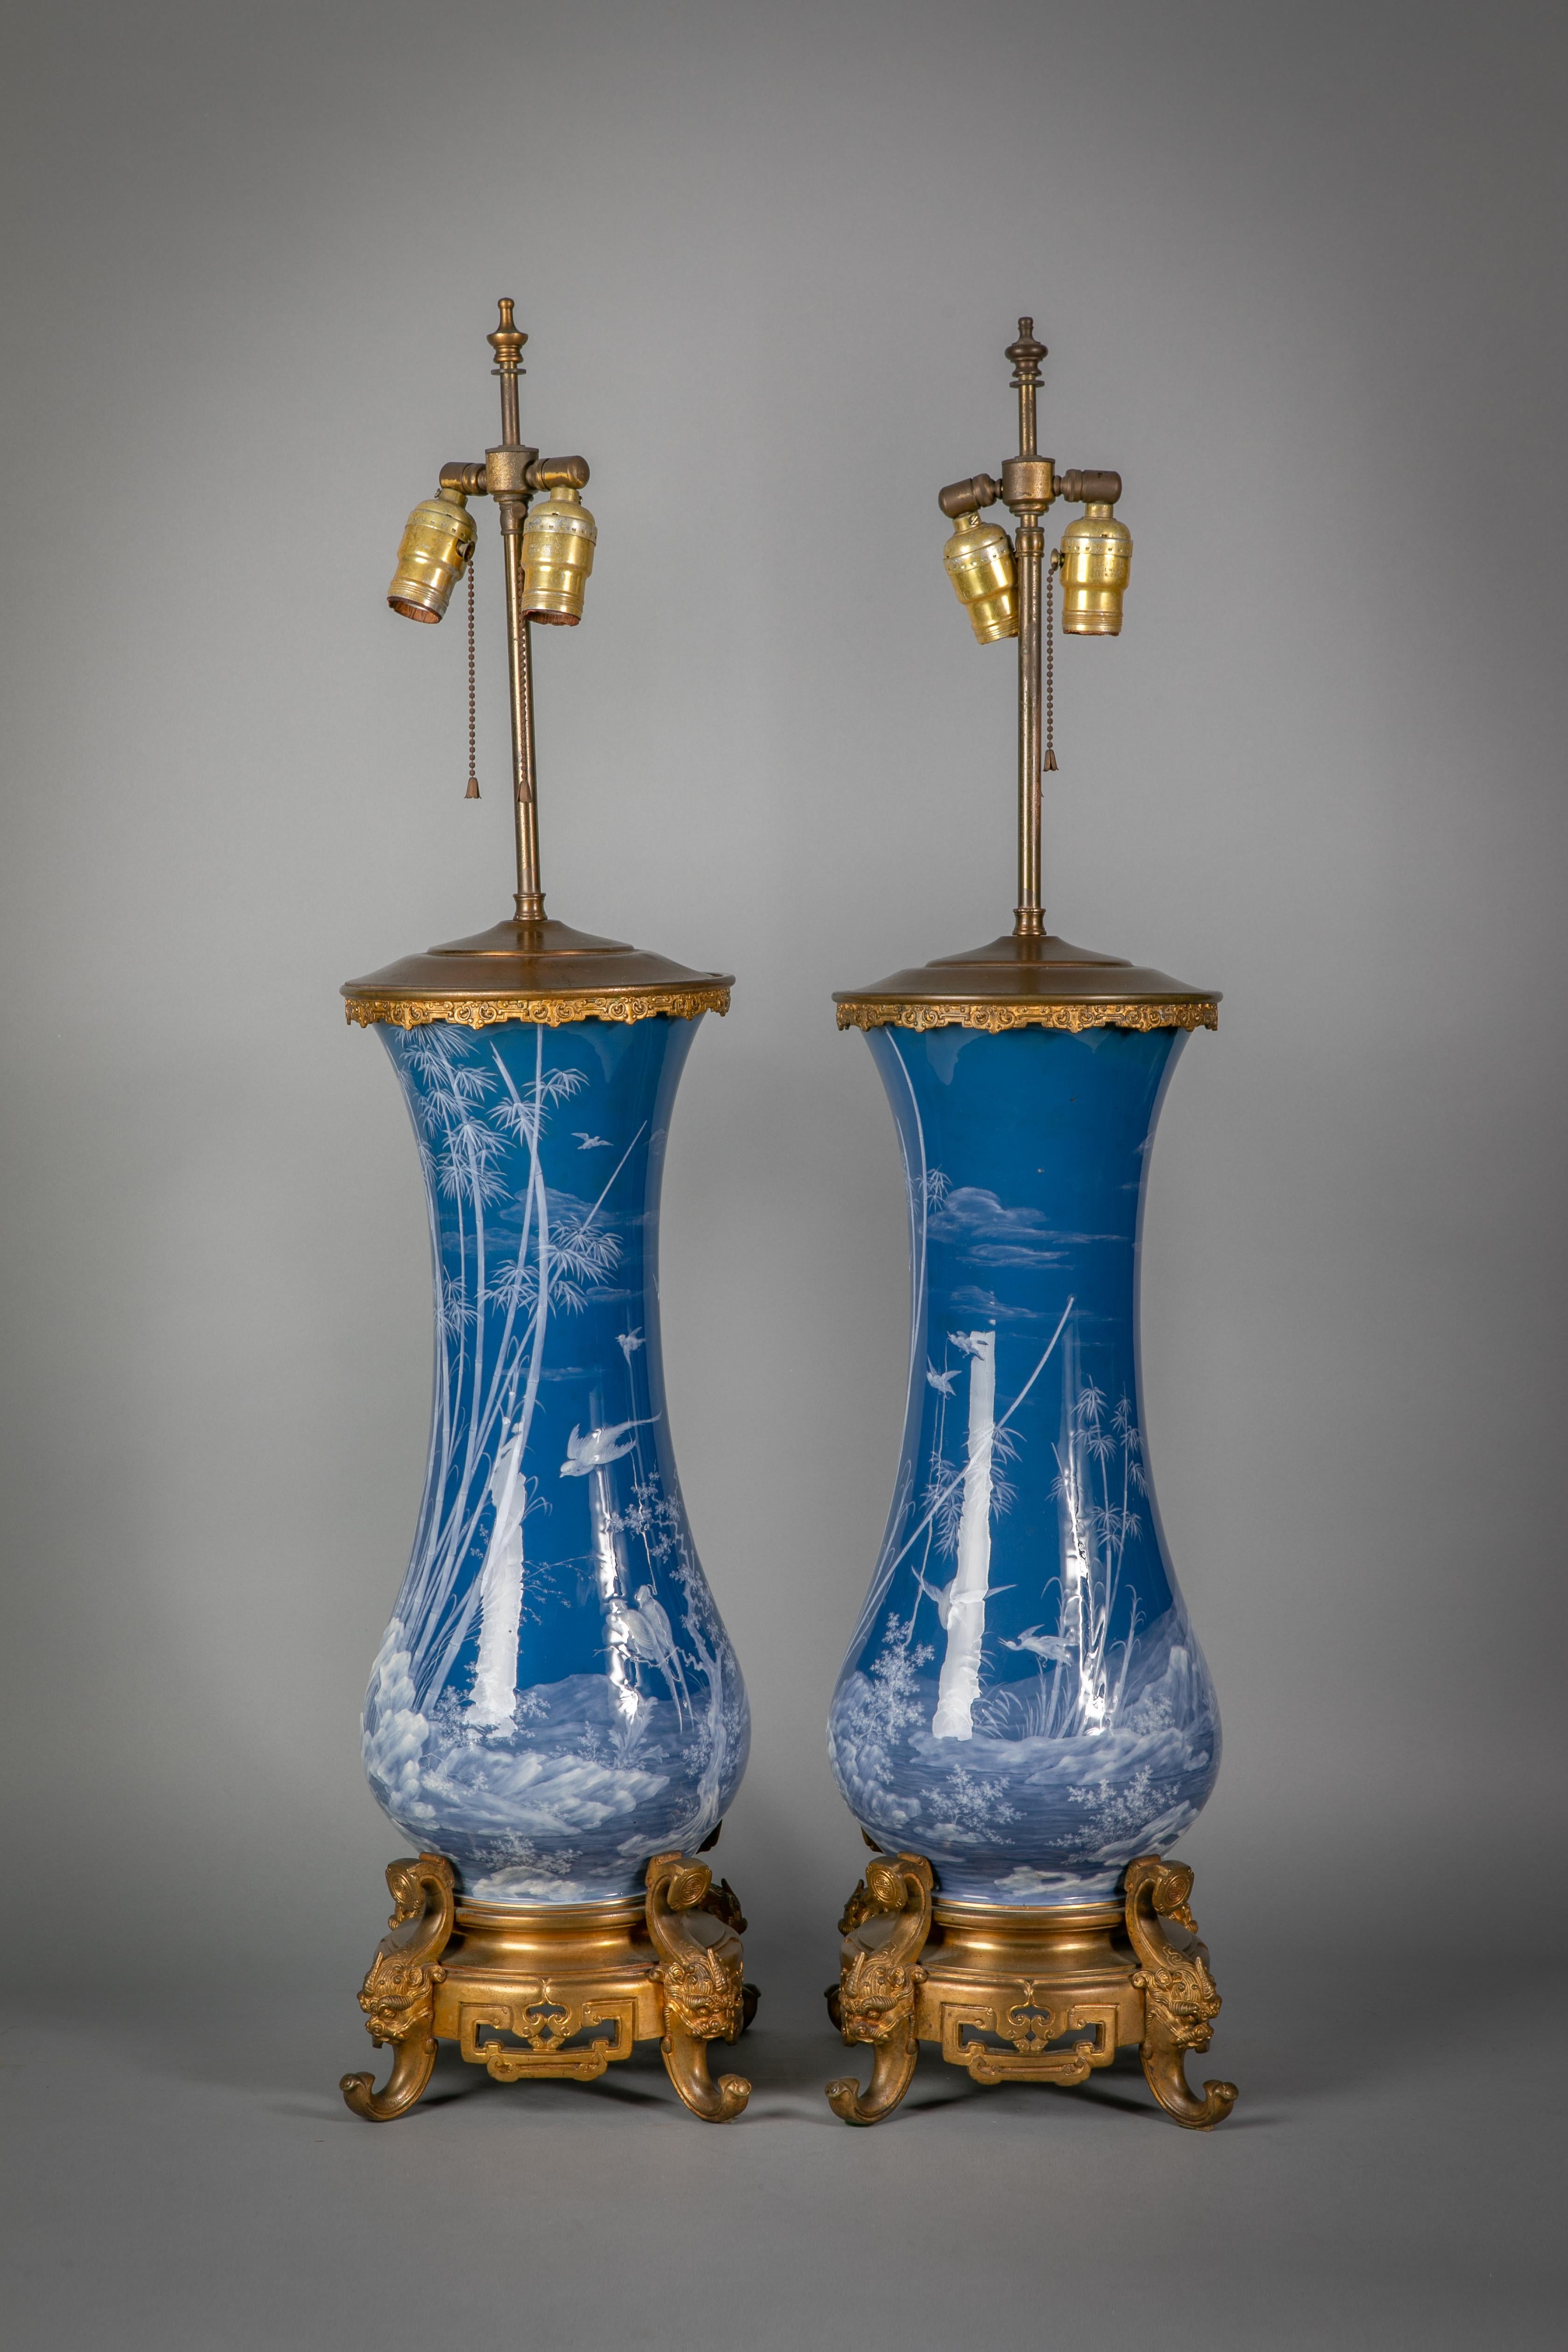 Pair of French Pate-Sur-Pate vases mounted as lamps, circa 1880 (CP & co., signed Melinan).